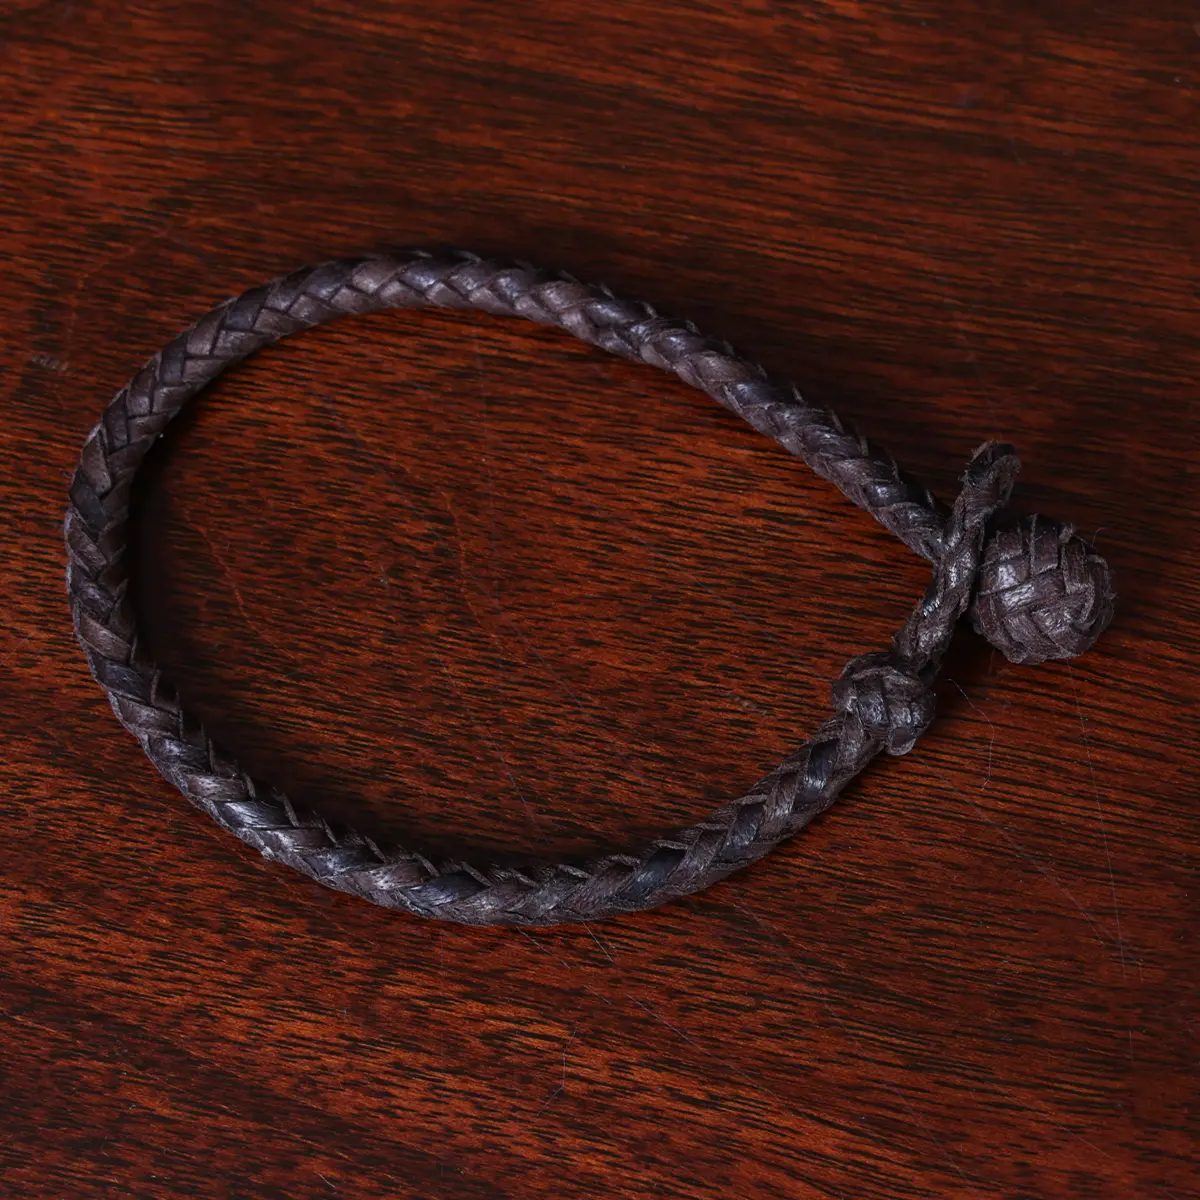 BRAIDED LEATHER BRACELET With Hook. Custom Made to Fit Your Wrist Size. in  Brown or Black,thin or Thick. Handbraided With Sturdy Metal Clasp -   Israel